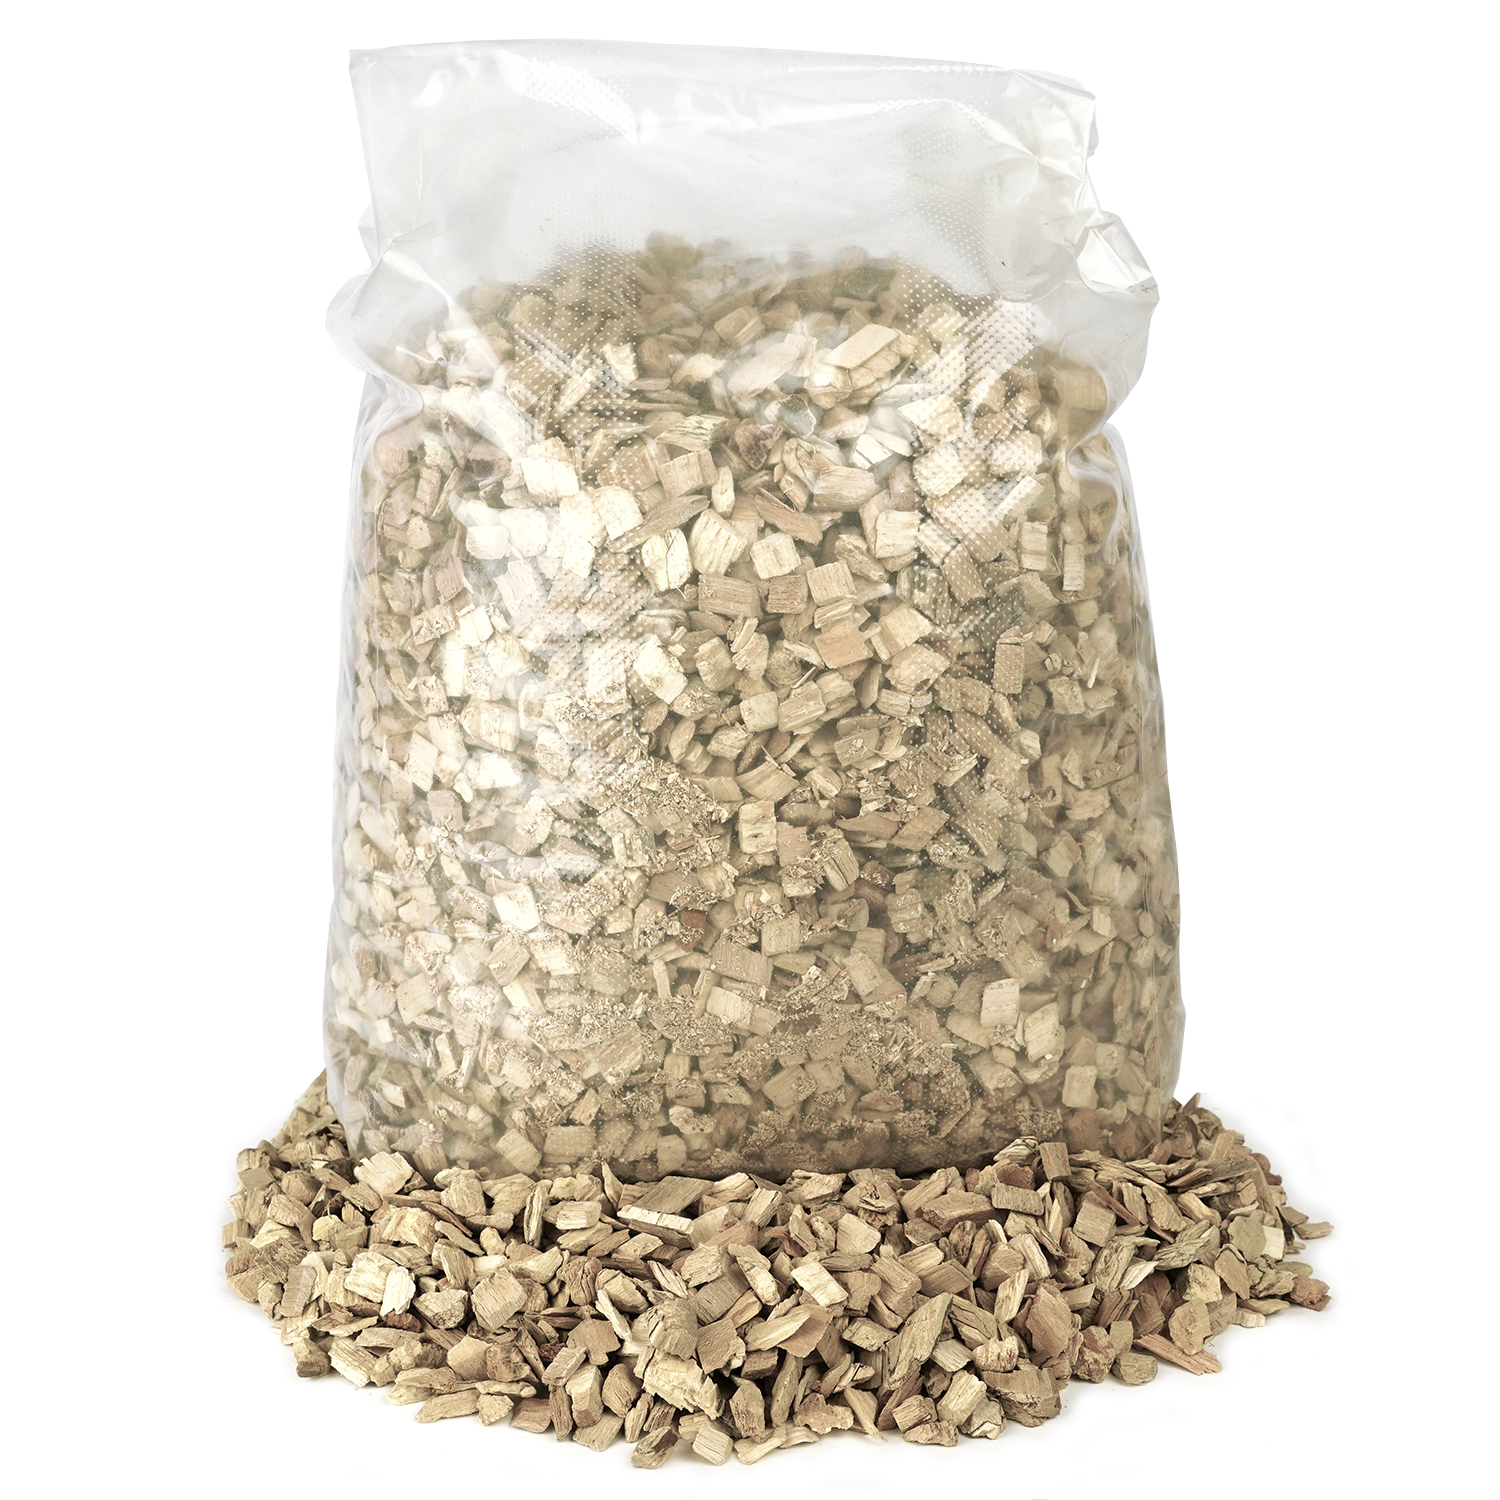 Eurocatch Rookhout - Esdoorn Snippers | Maple | 20Ltr | 5Kg